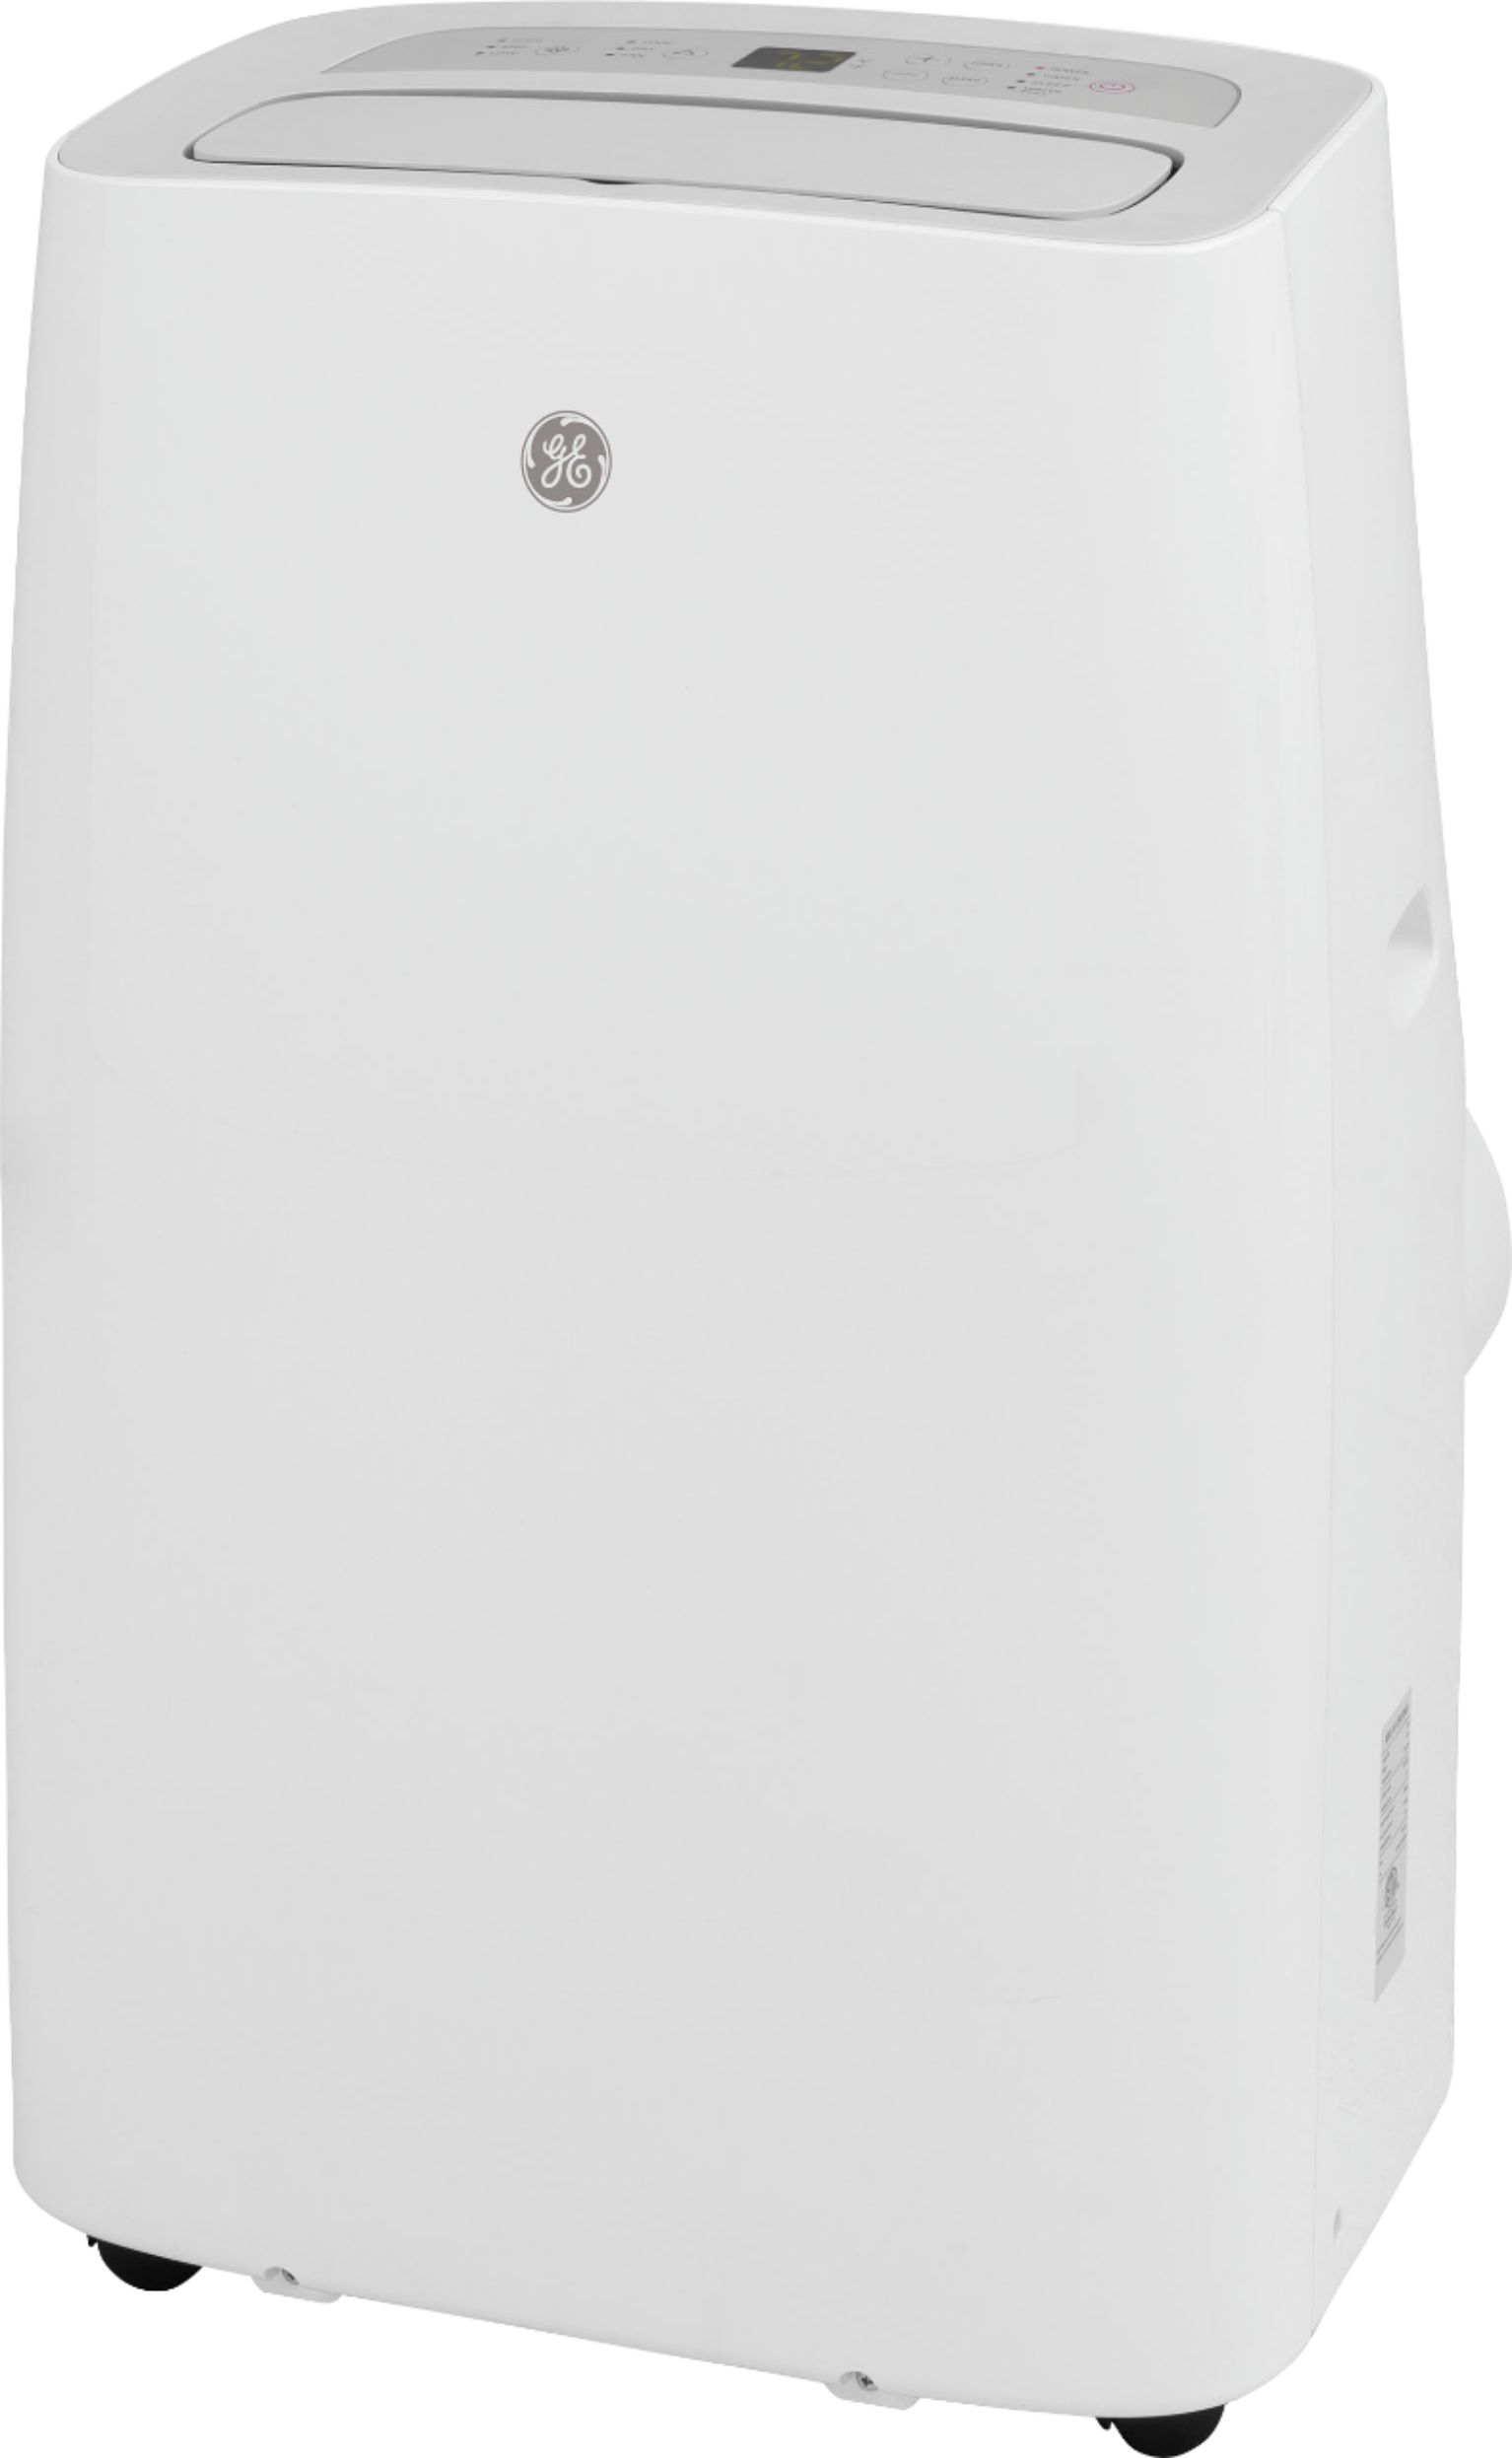 Left View: GE - 350 Sq. Ft. Portable Air Conditioner - White